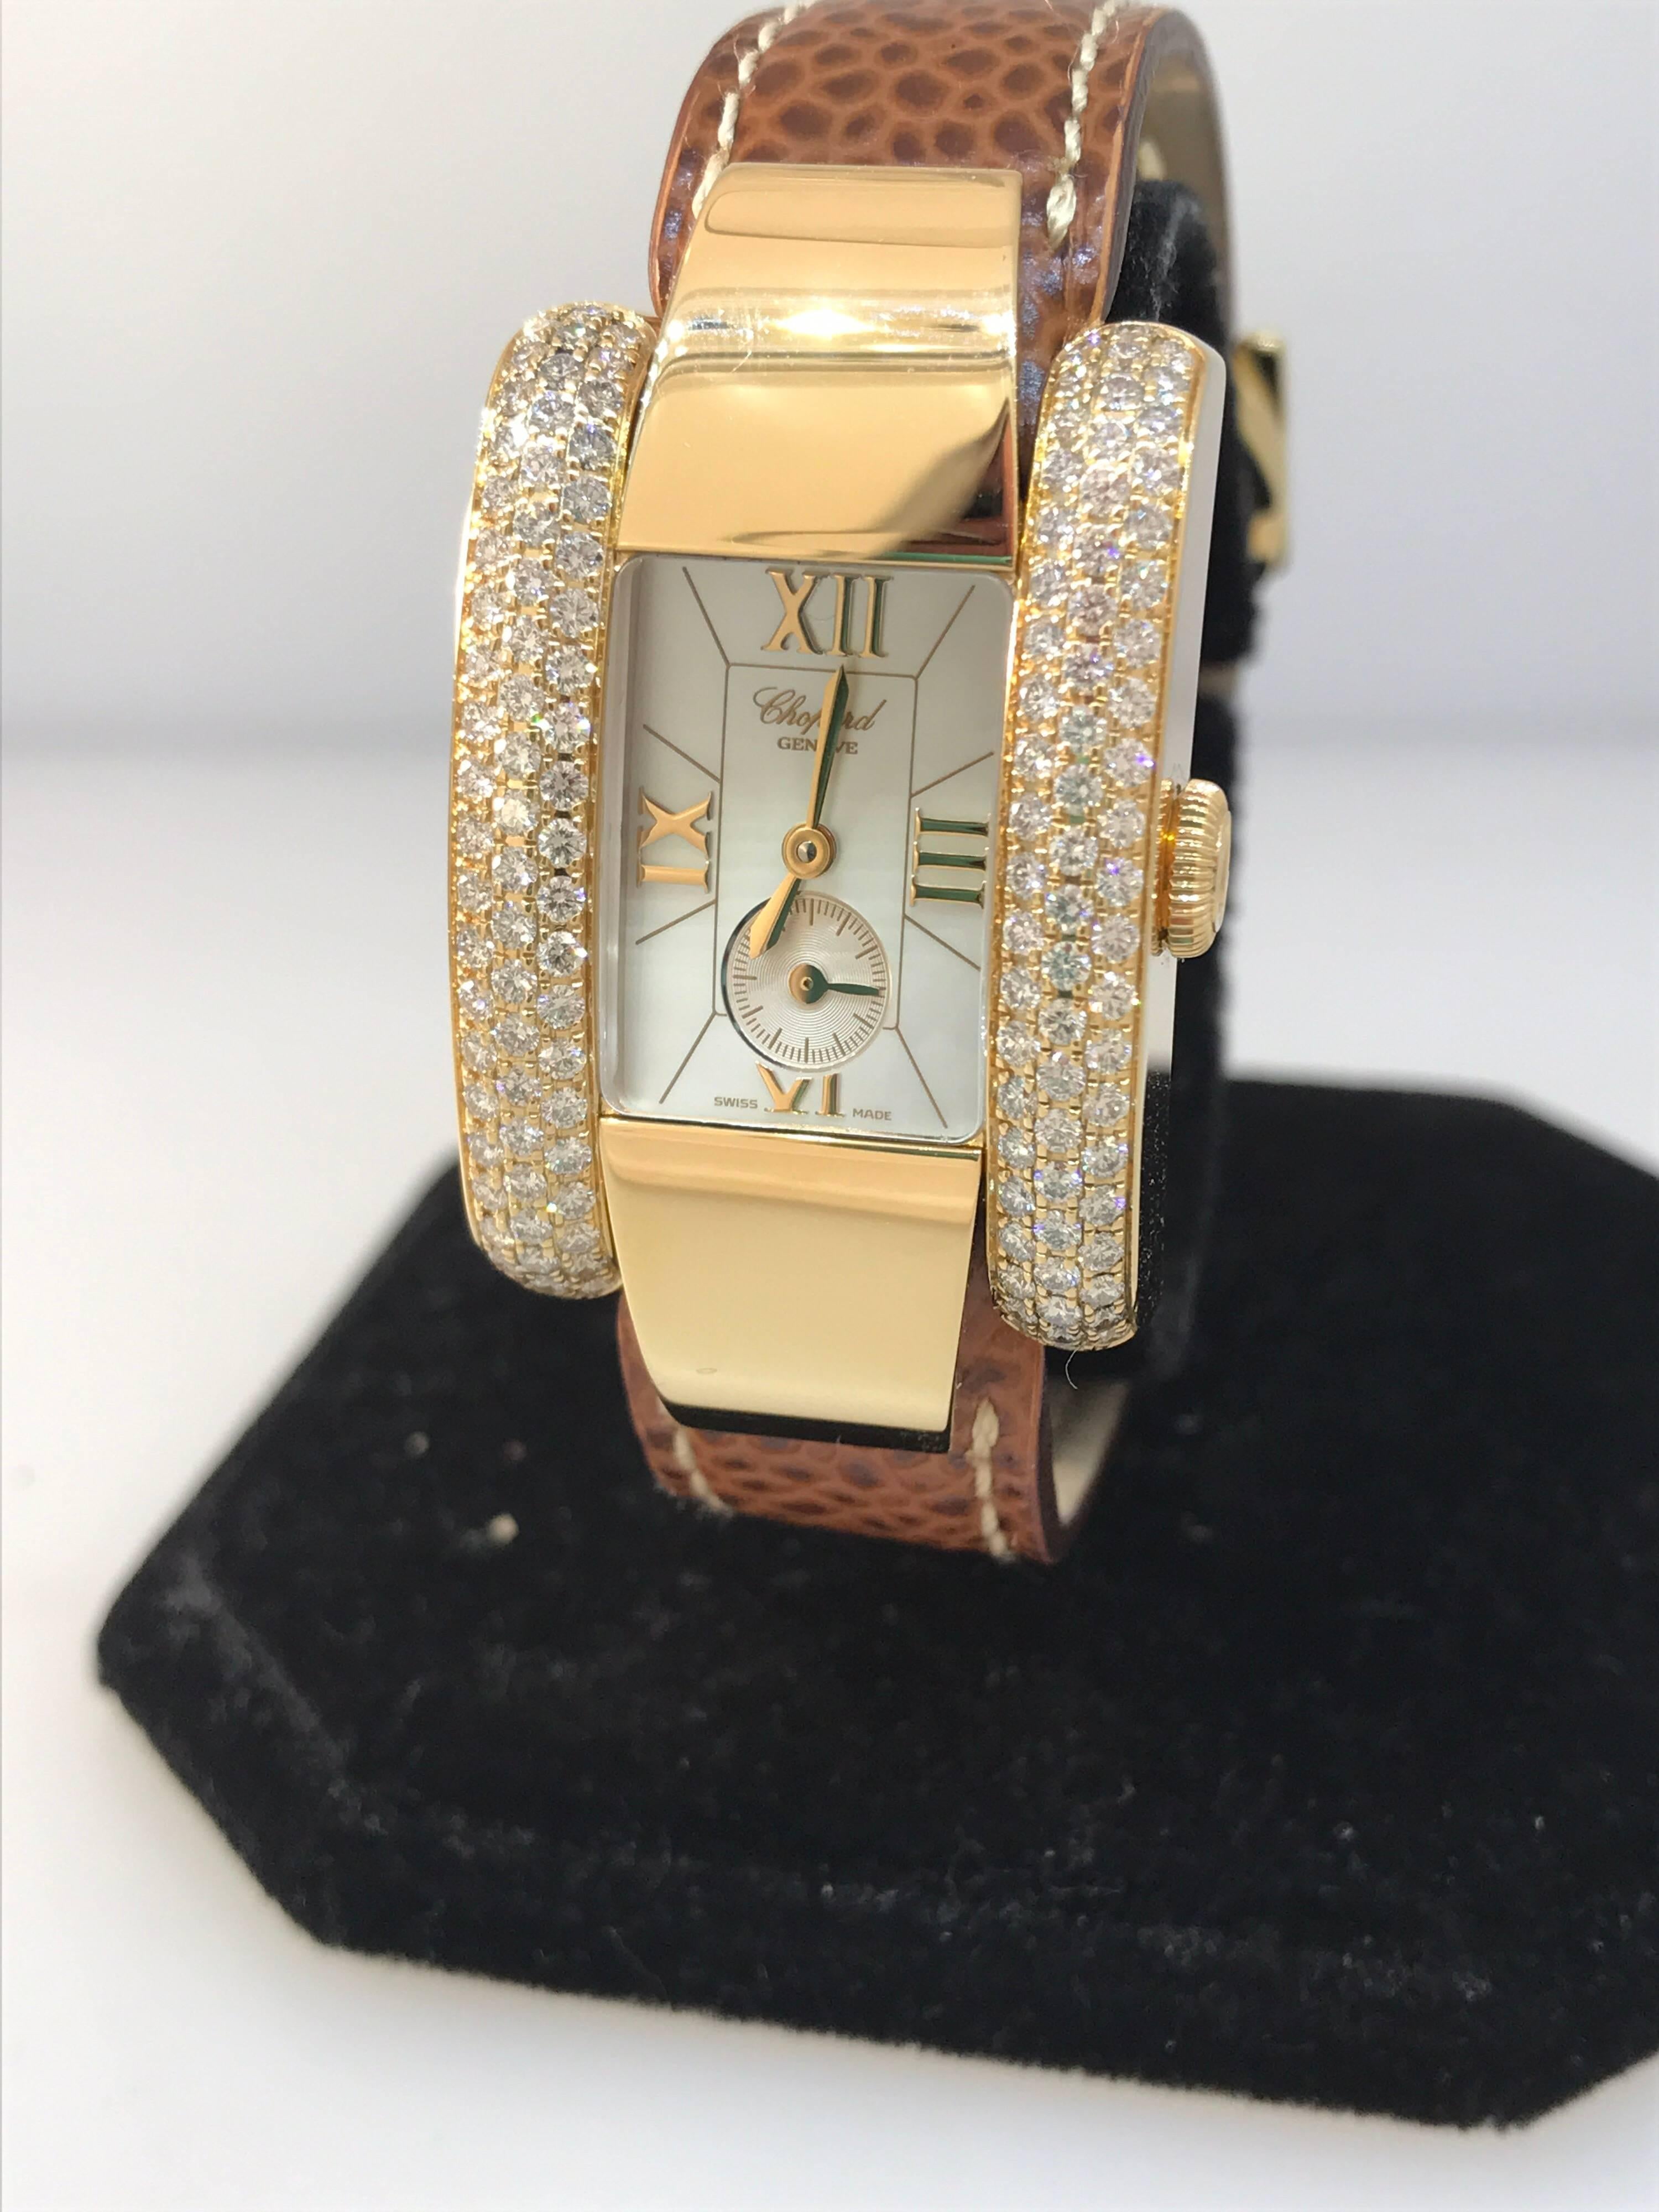 Chopard La Strada Lady's Watch

Model Number: 41/6823-0001

100% Authentic

Brand New

Comes with original Chopard box, certificate of authenticity and warranty, and instruction manual

18 Karat Yellow Gold Case and Buckle  (63.20gr)

Sapphire